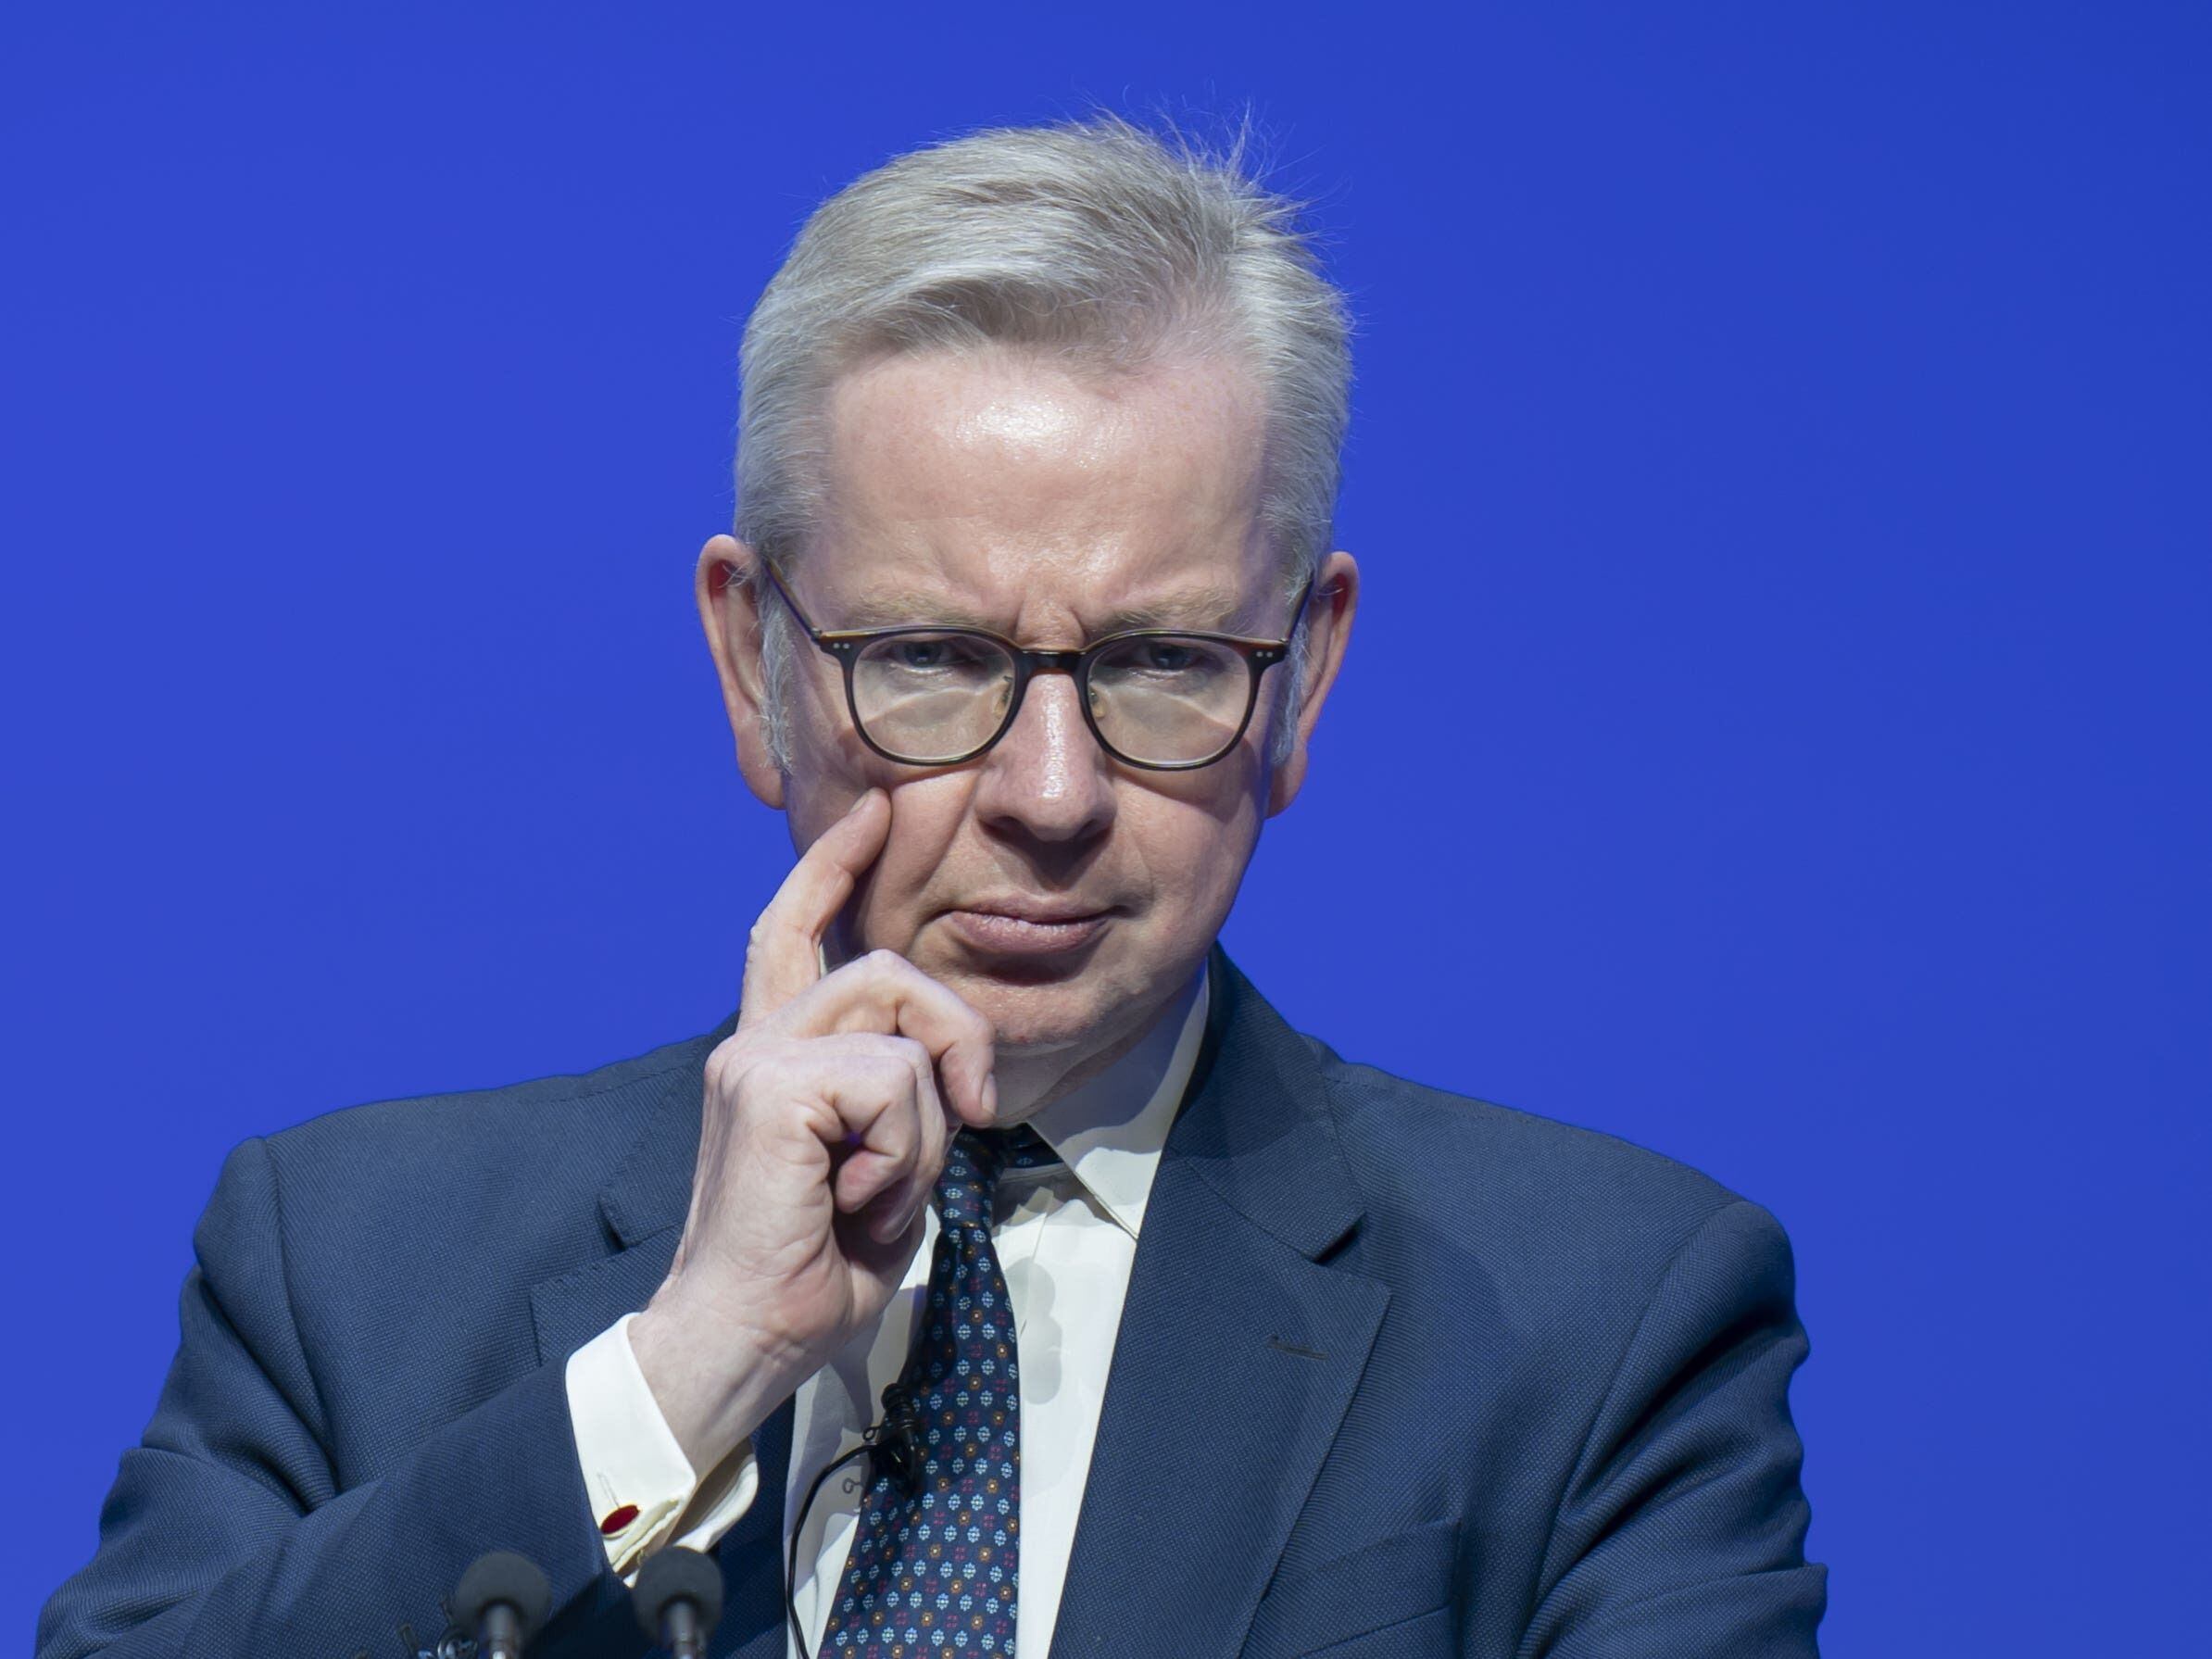 Michael Gove could vote against Truss’s ‘profoundly concerning’ tax plans